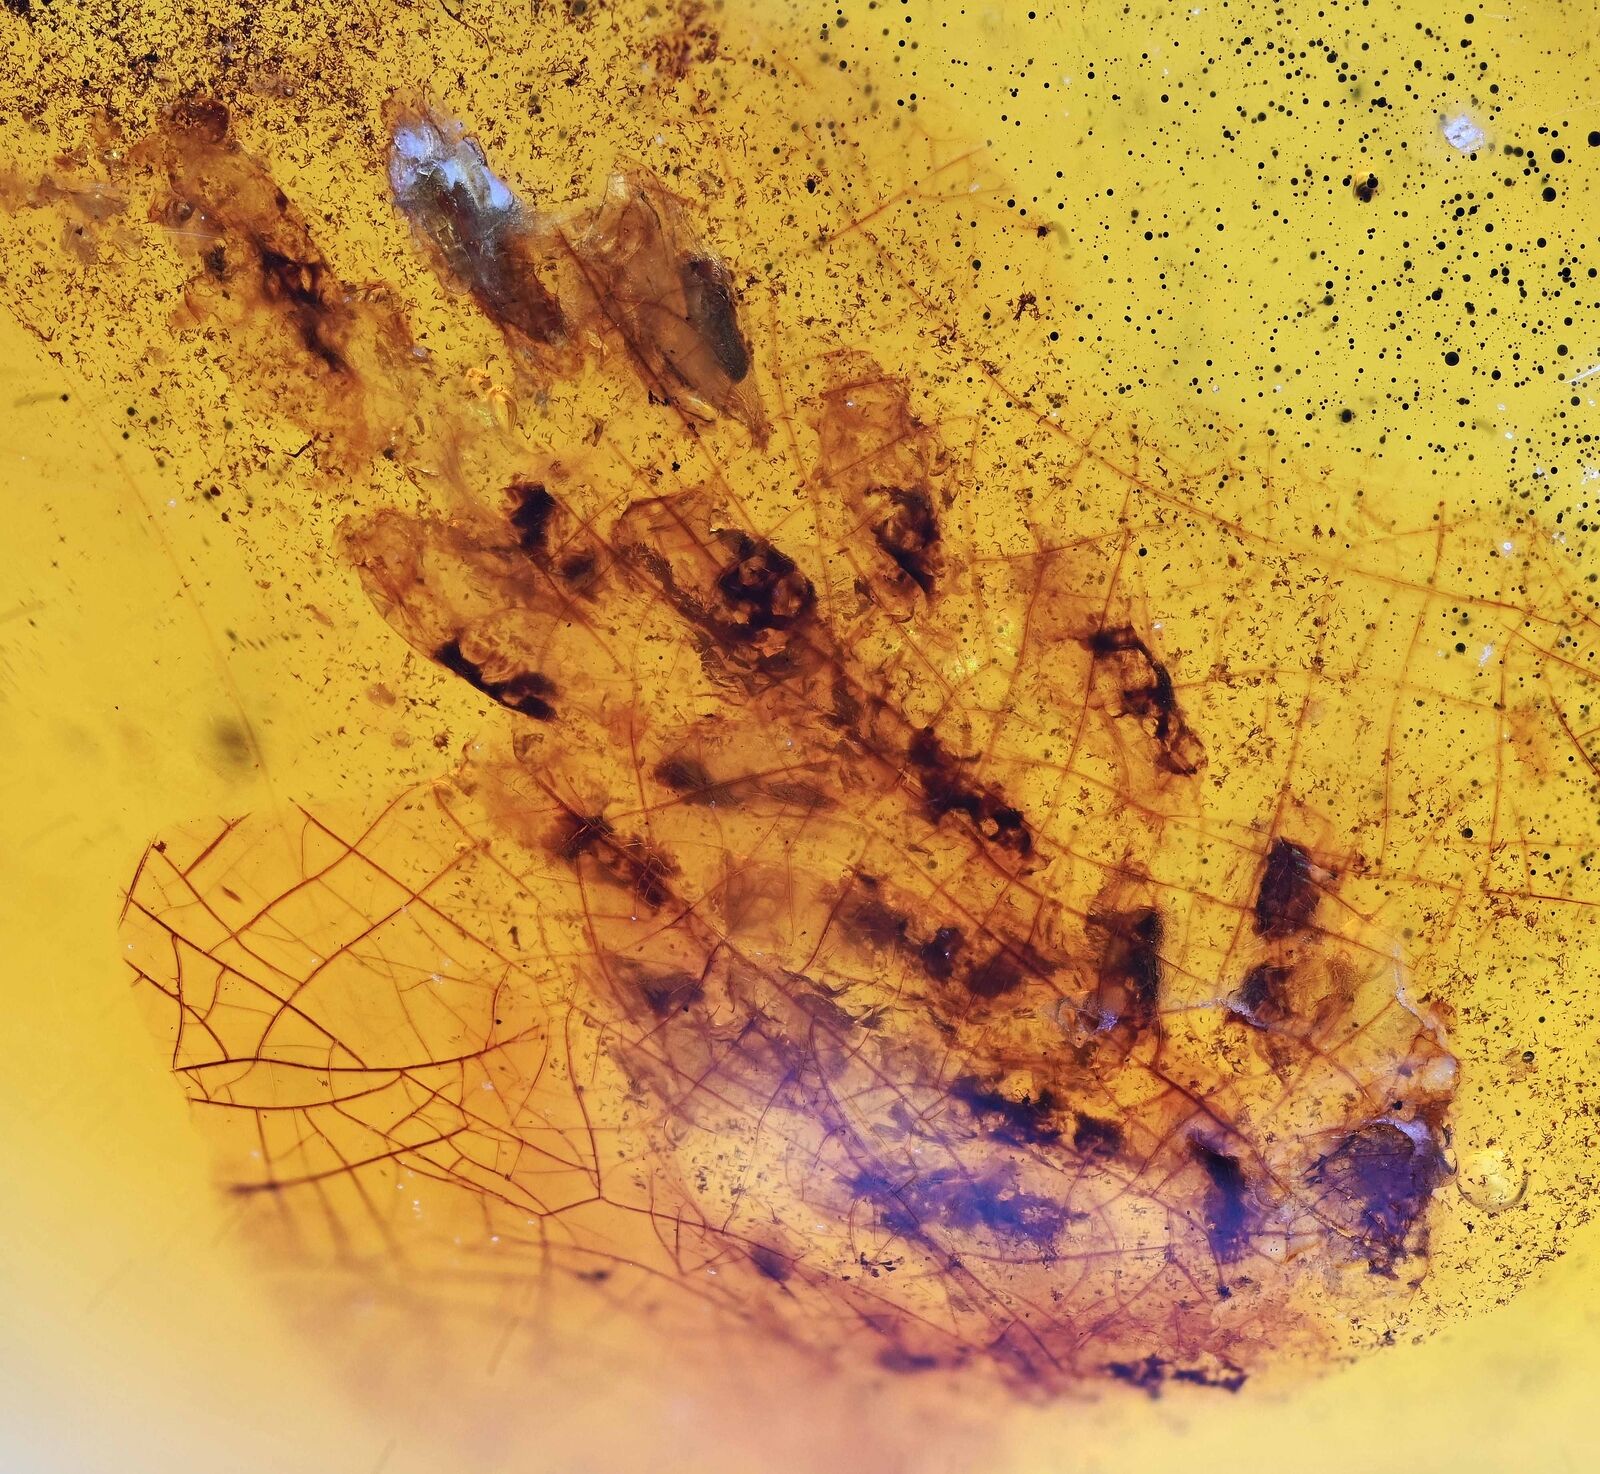 SUPER RARE Spider Egg Sac, Fossil Inclusion in Burmese Amber